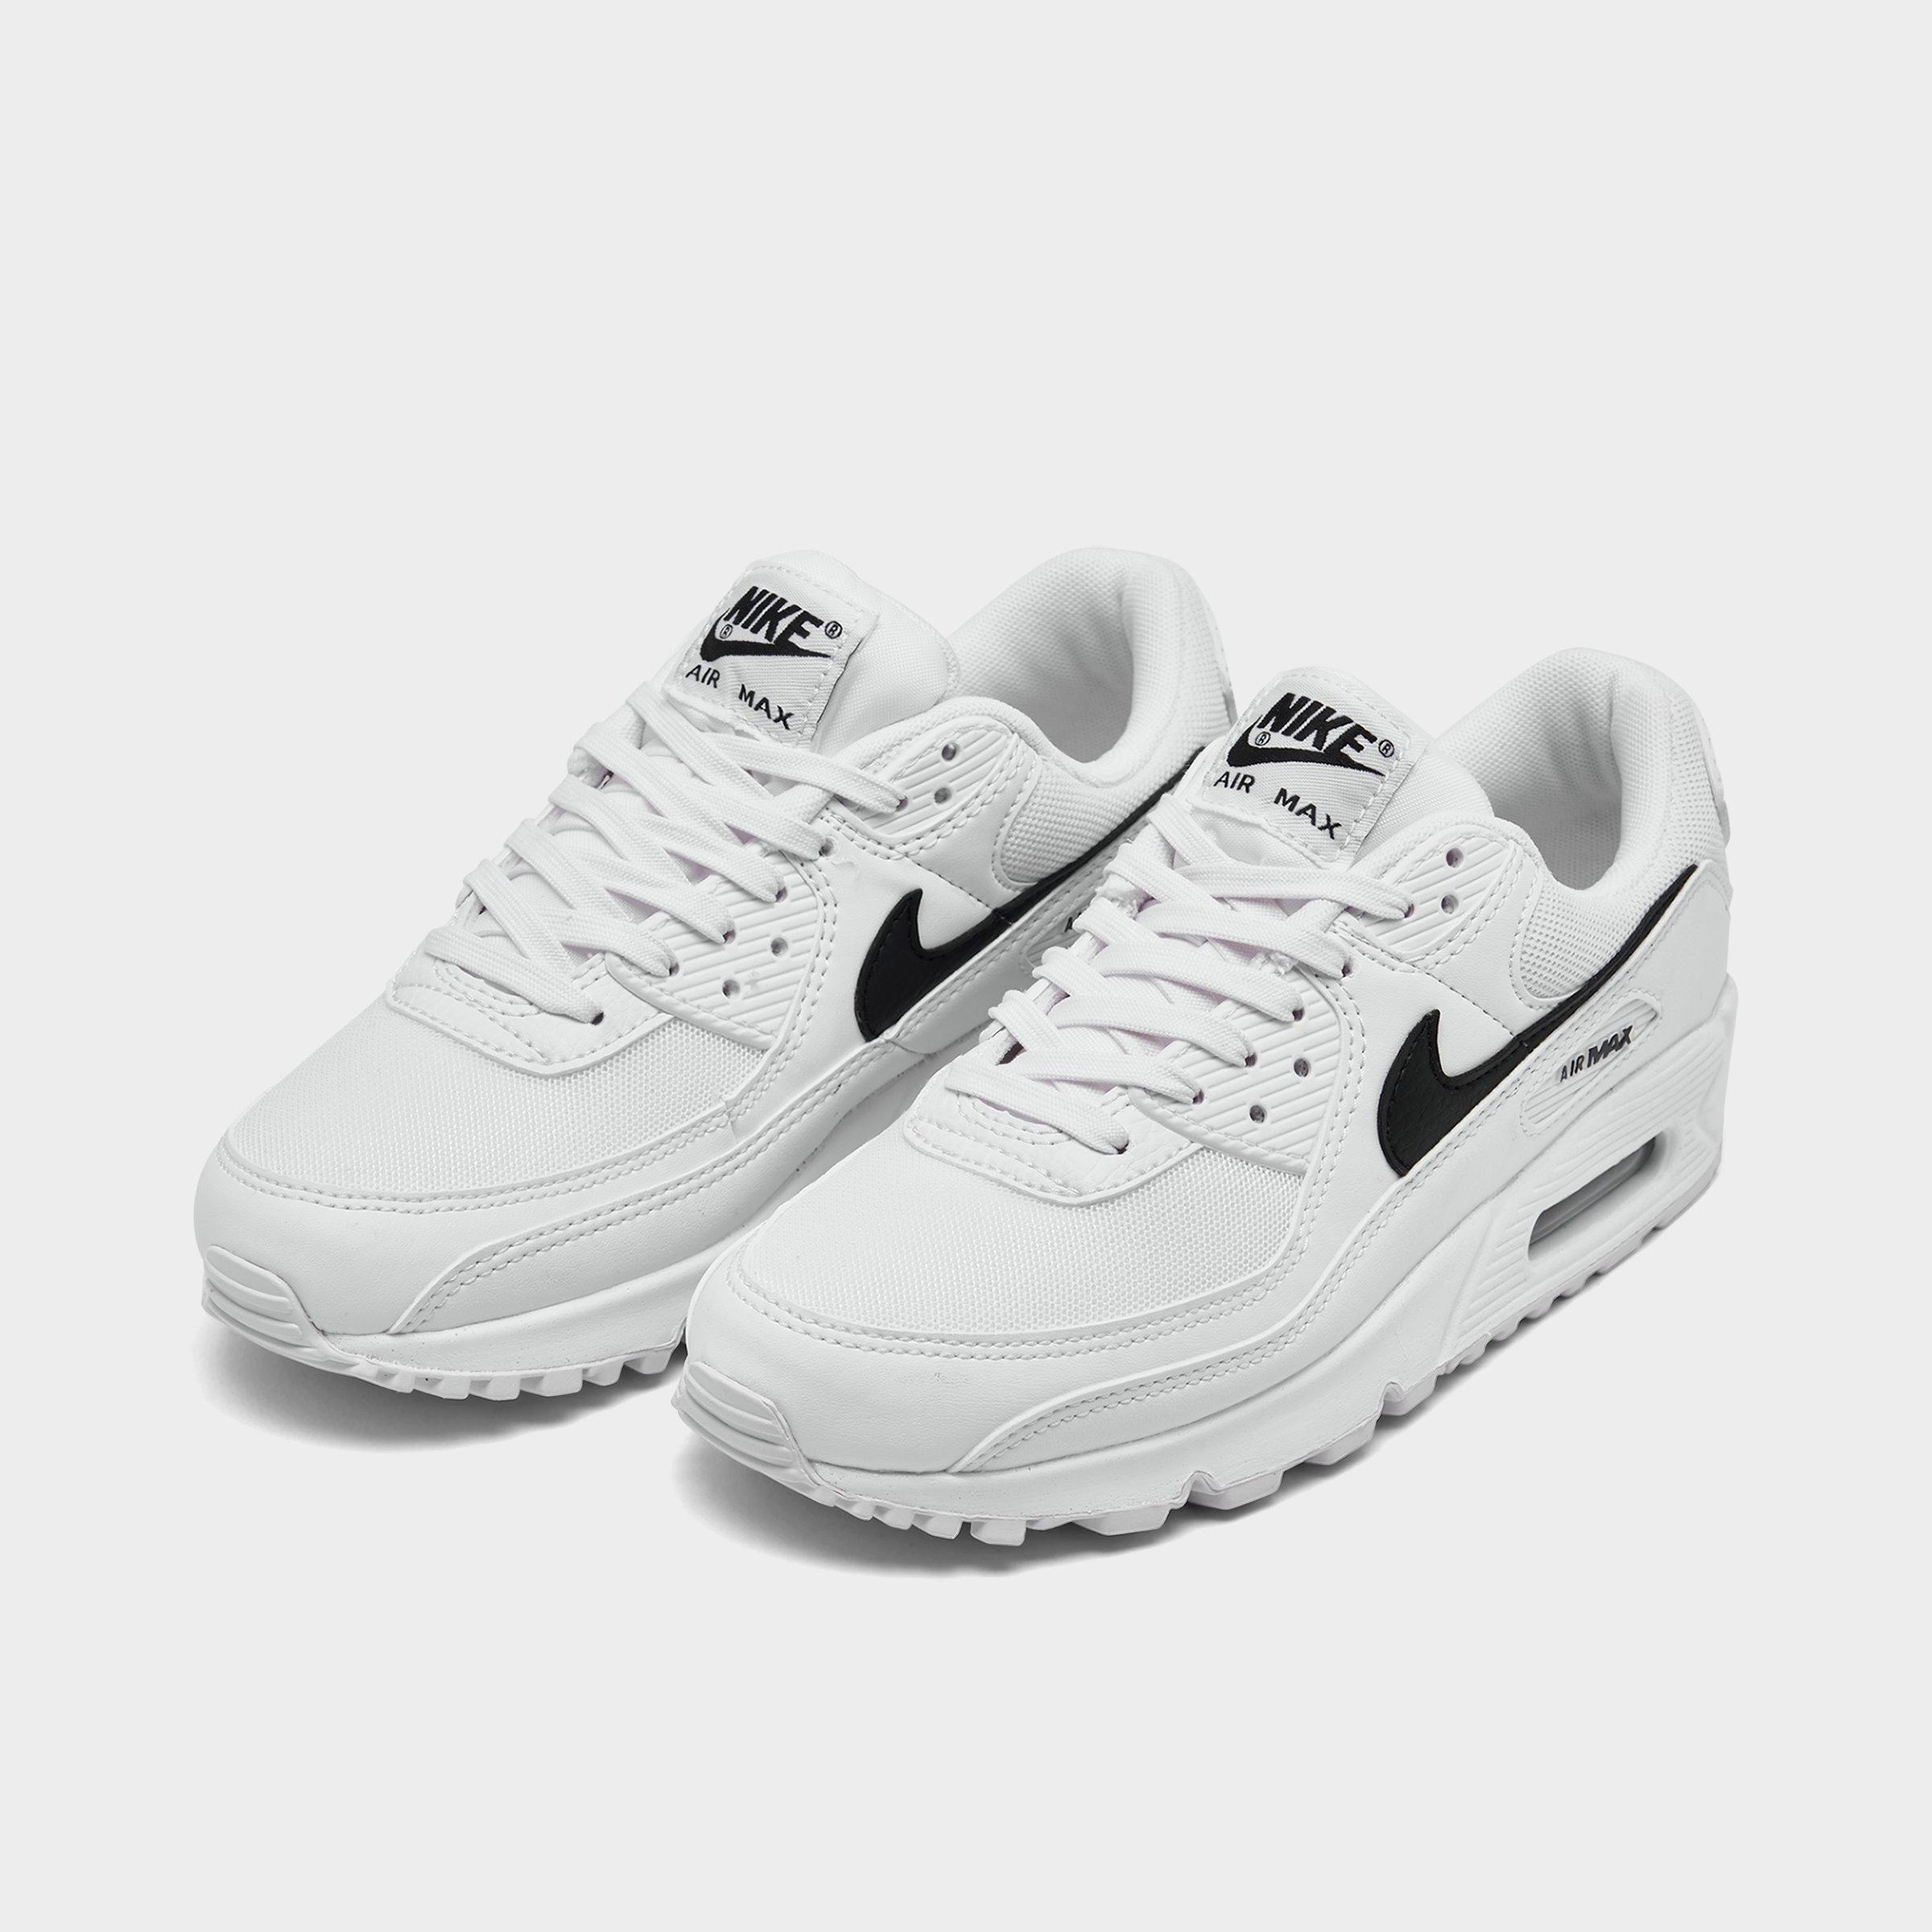 white with black tick air max 90